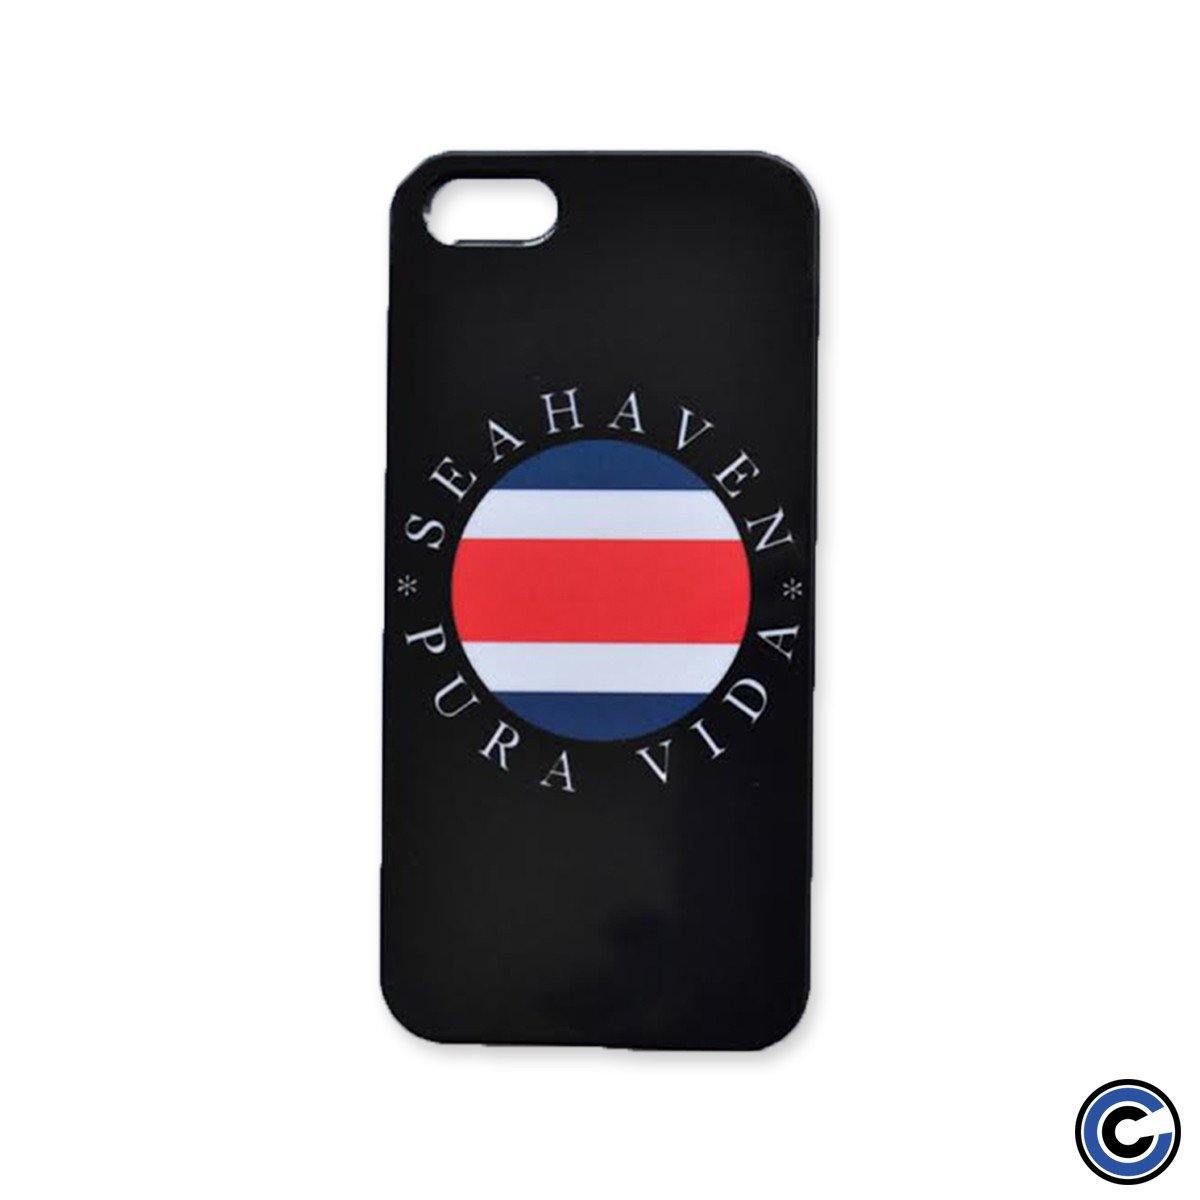 Buy – Seahaven "Flag" iPhone Case – Band & Music Merch – Cold Cuts Merch